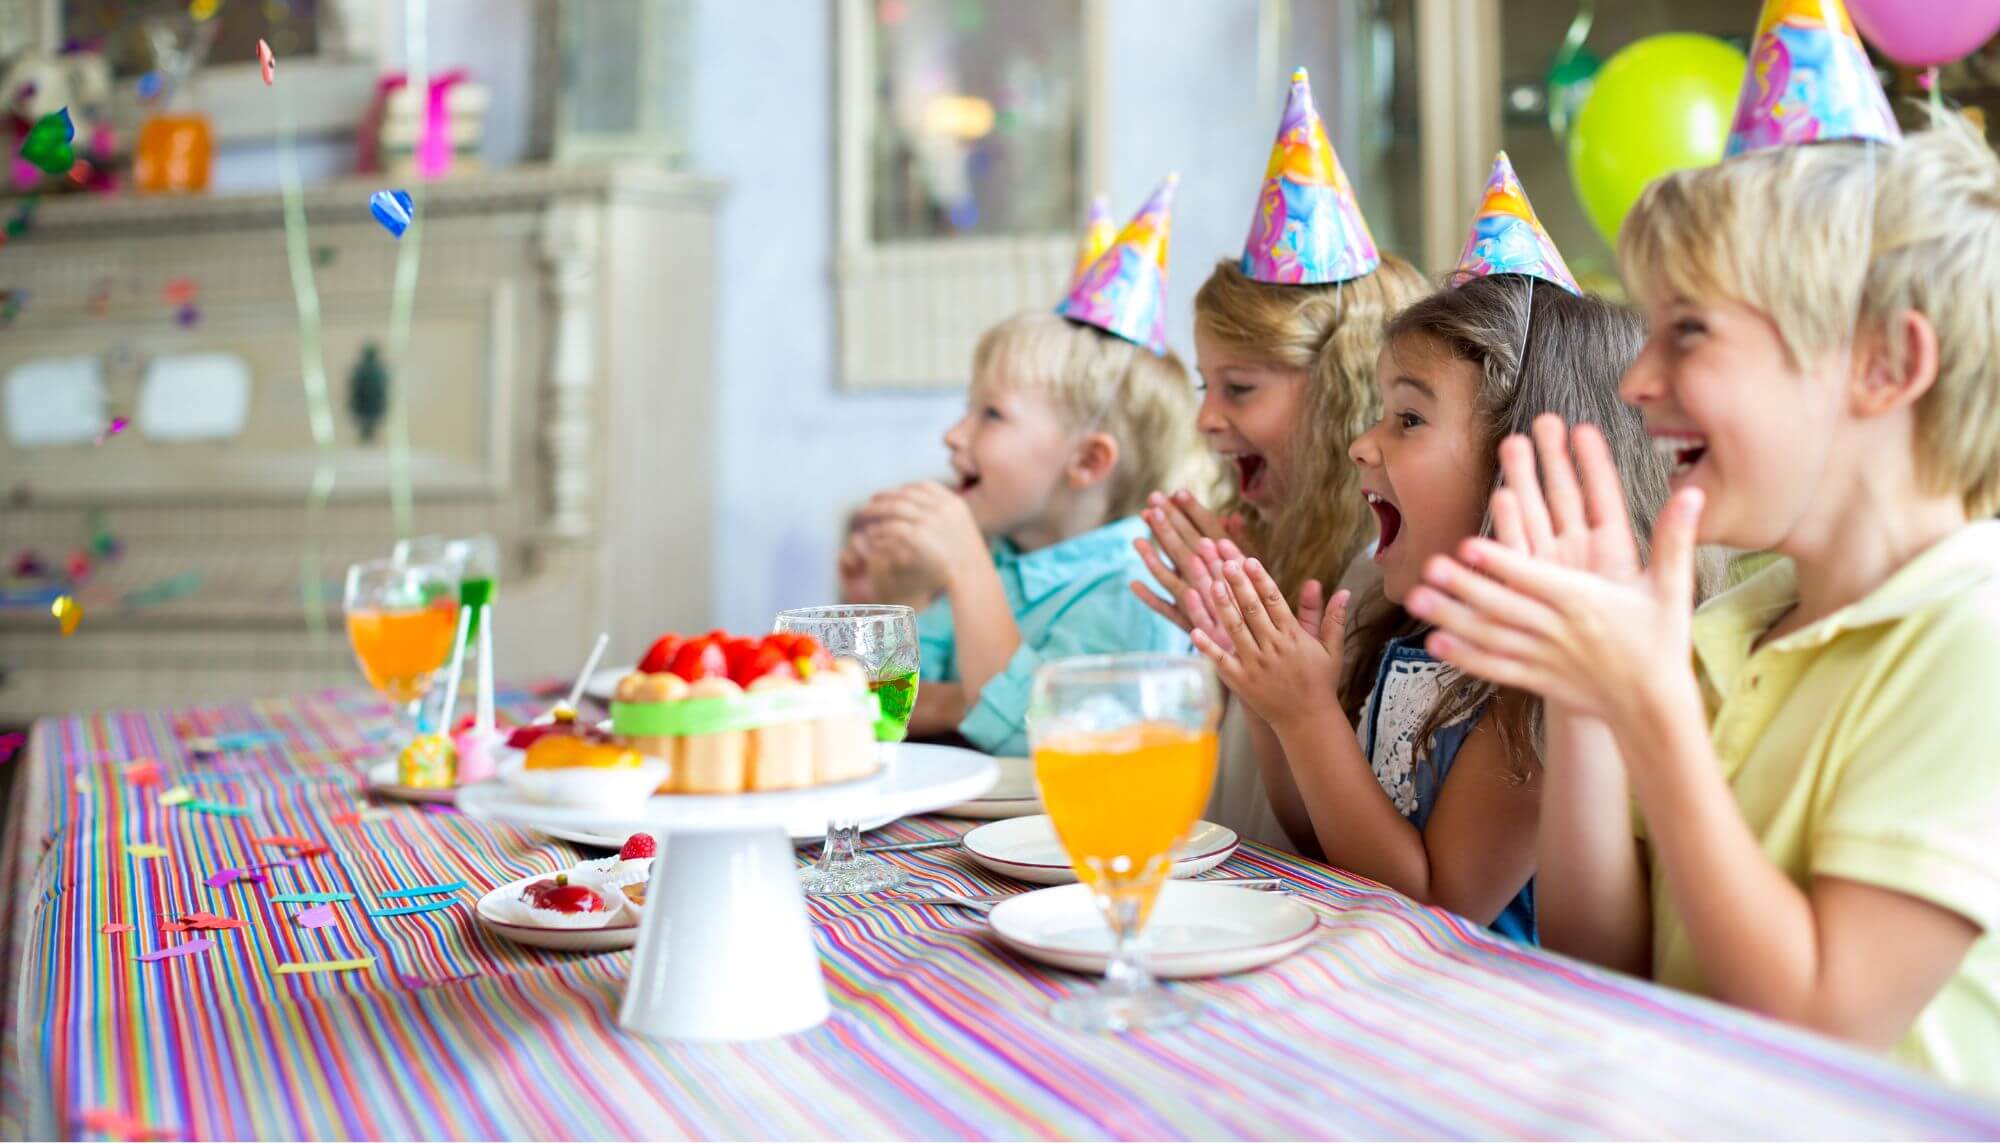 A group of children sitting at a a party table. They are wearing party hats and smiling and clapping.